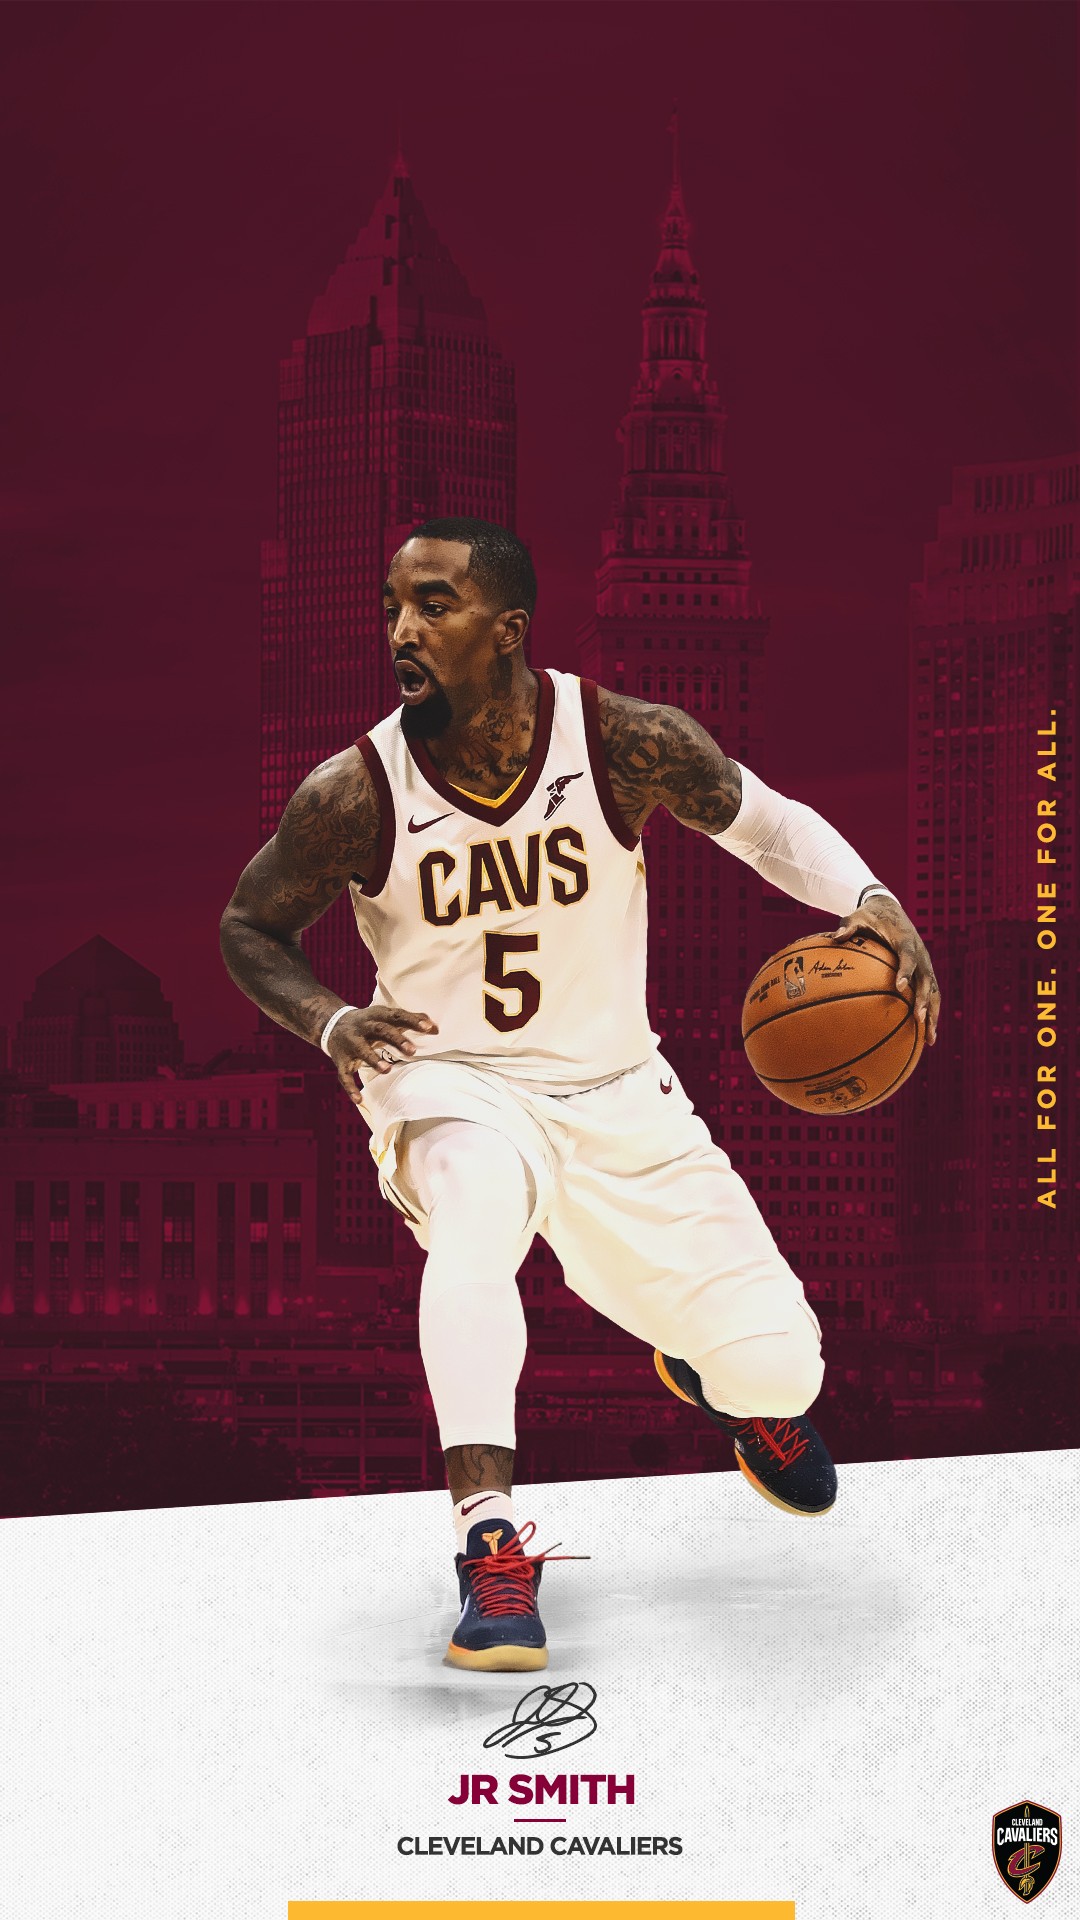 JR Smith Mobile Wallpaper With Resolution 1080X1920